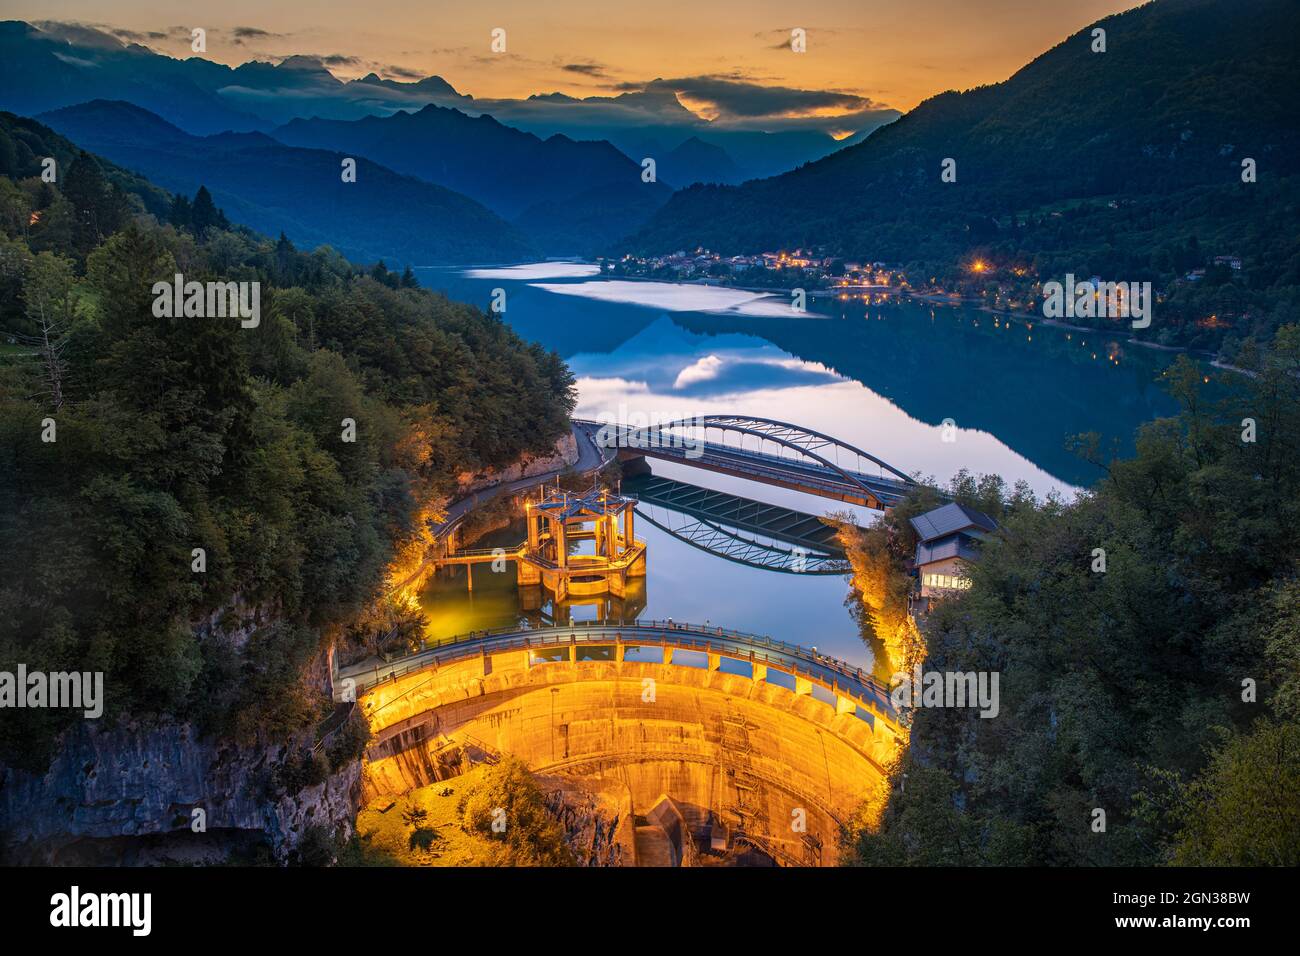 Aerial view of a hydropower station of Lago di Barcis lake in Italy Stock Photo